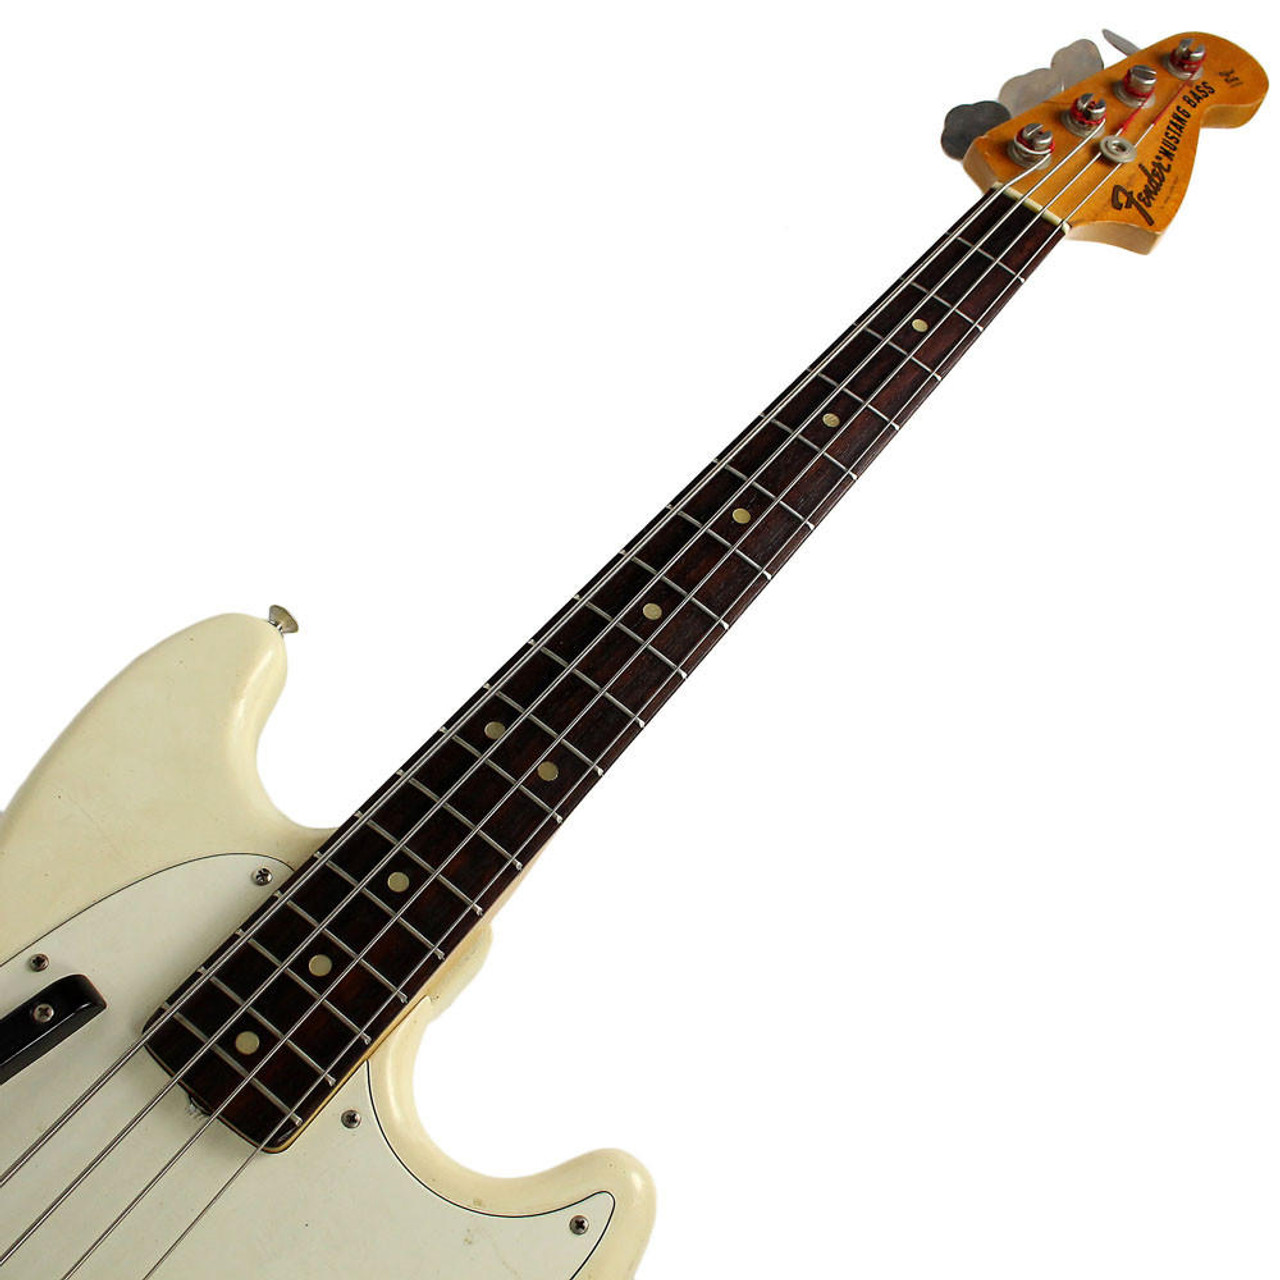 Vintage 1976 Fender Mustang Bass Refinished in Olympic White